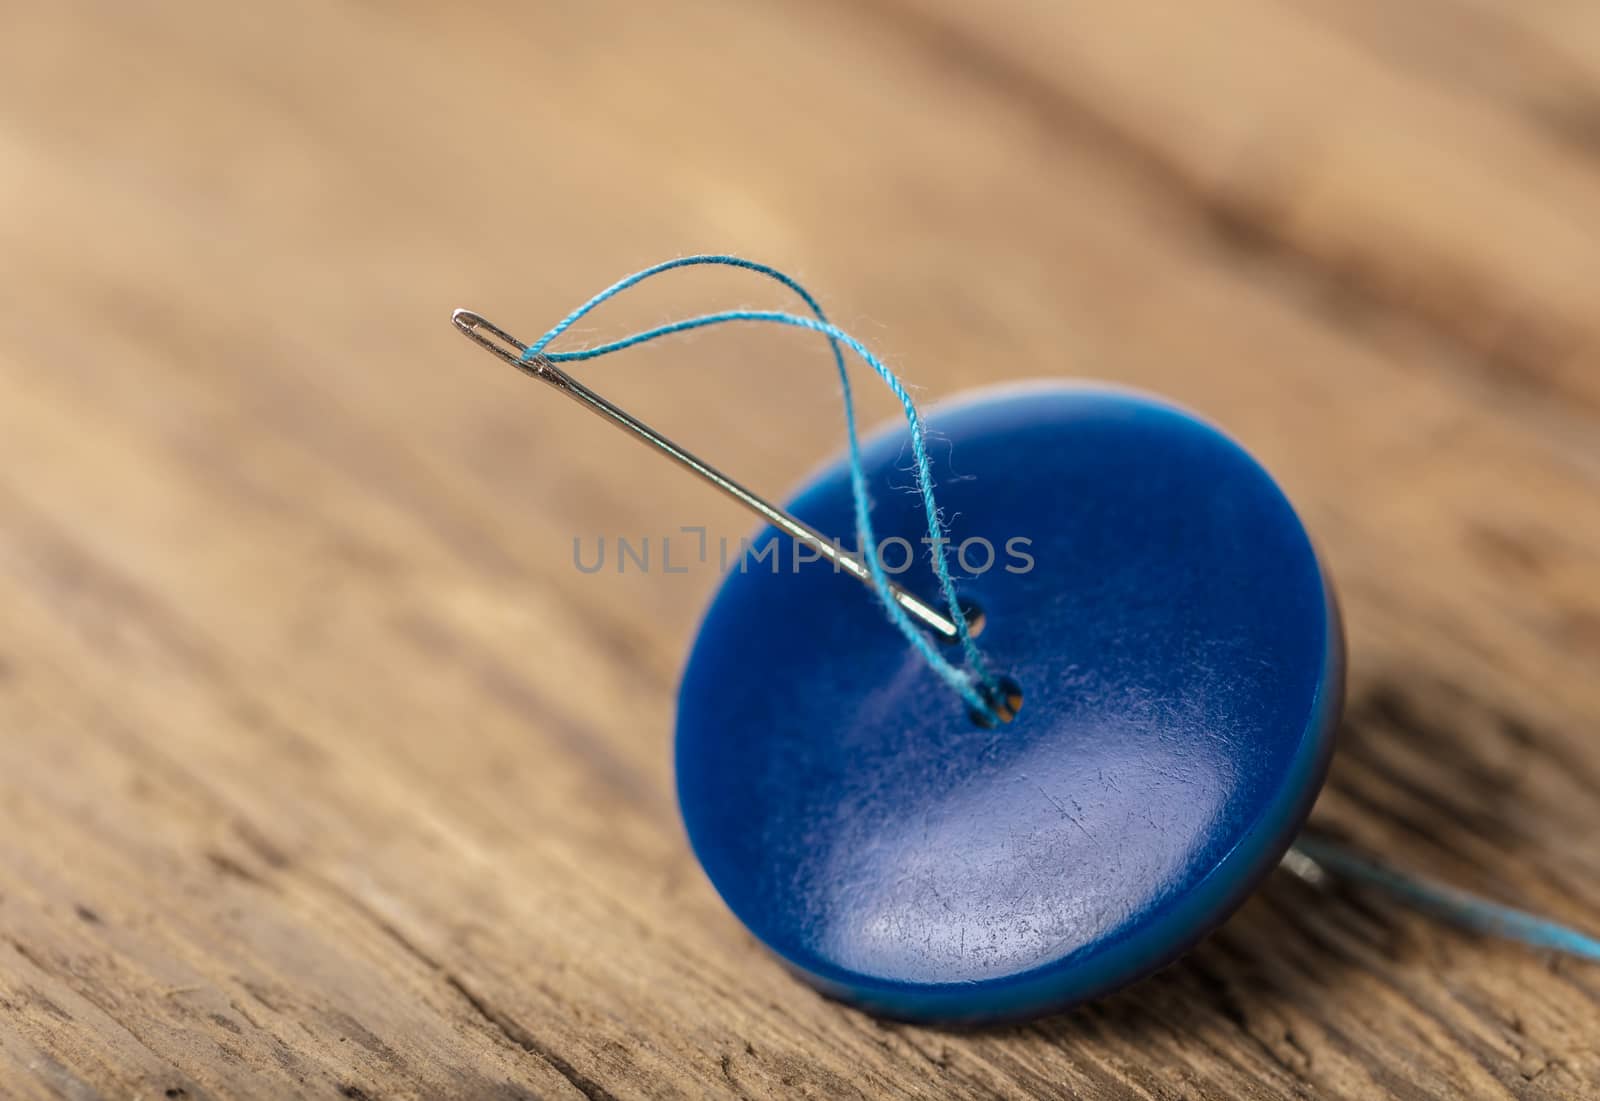 blue button with needle close-up on a wooden background